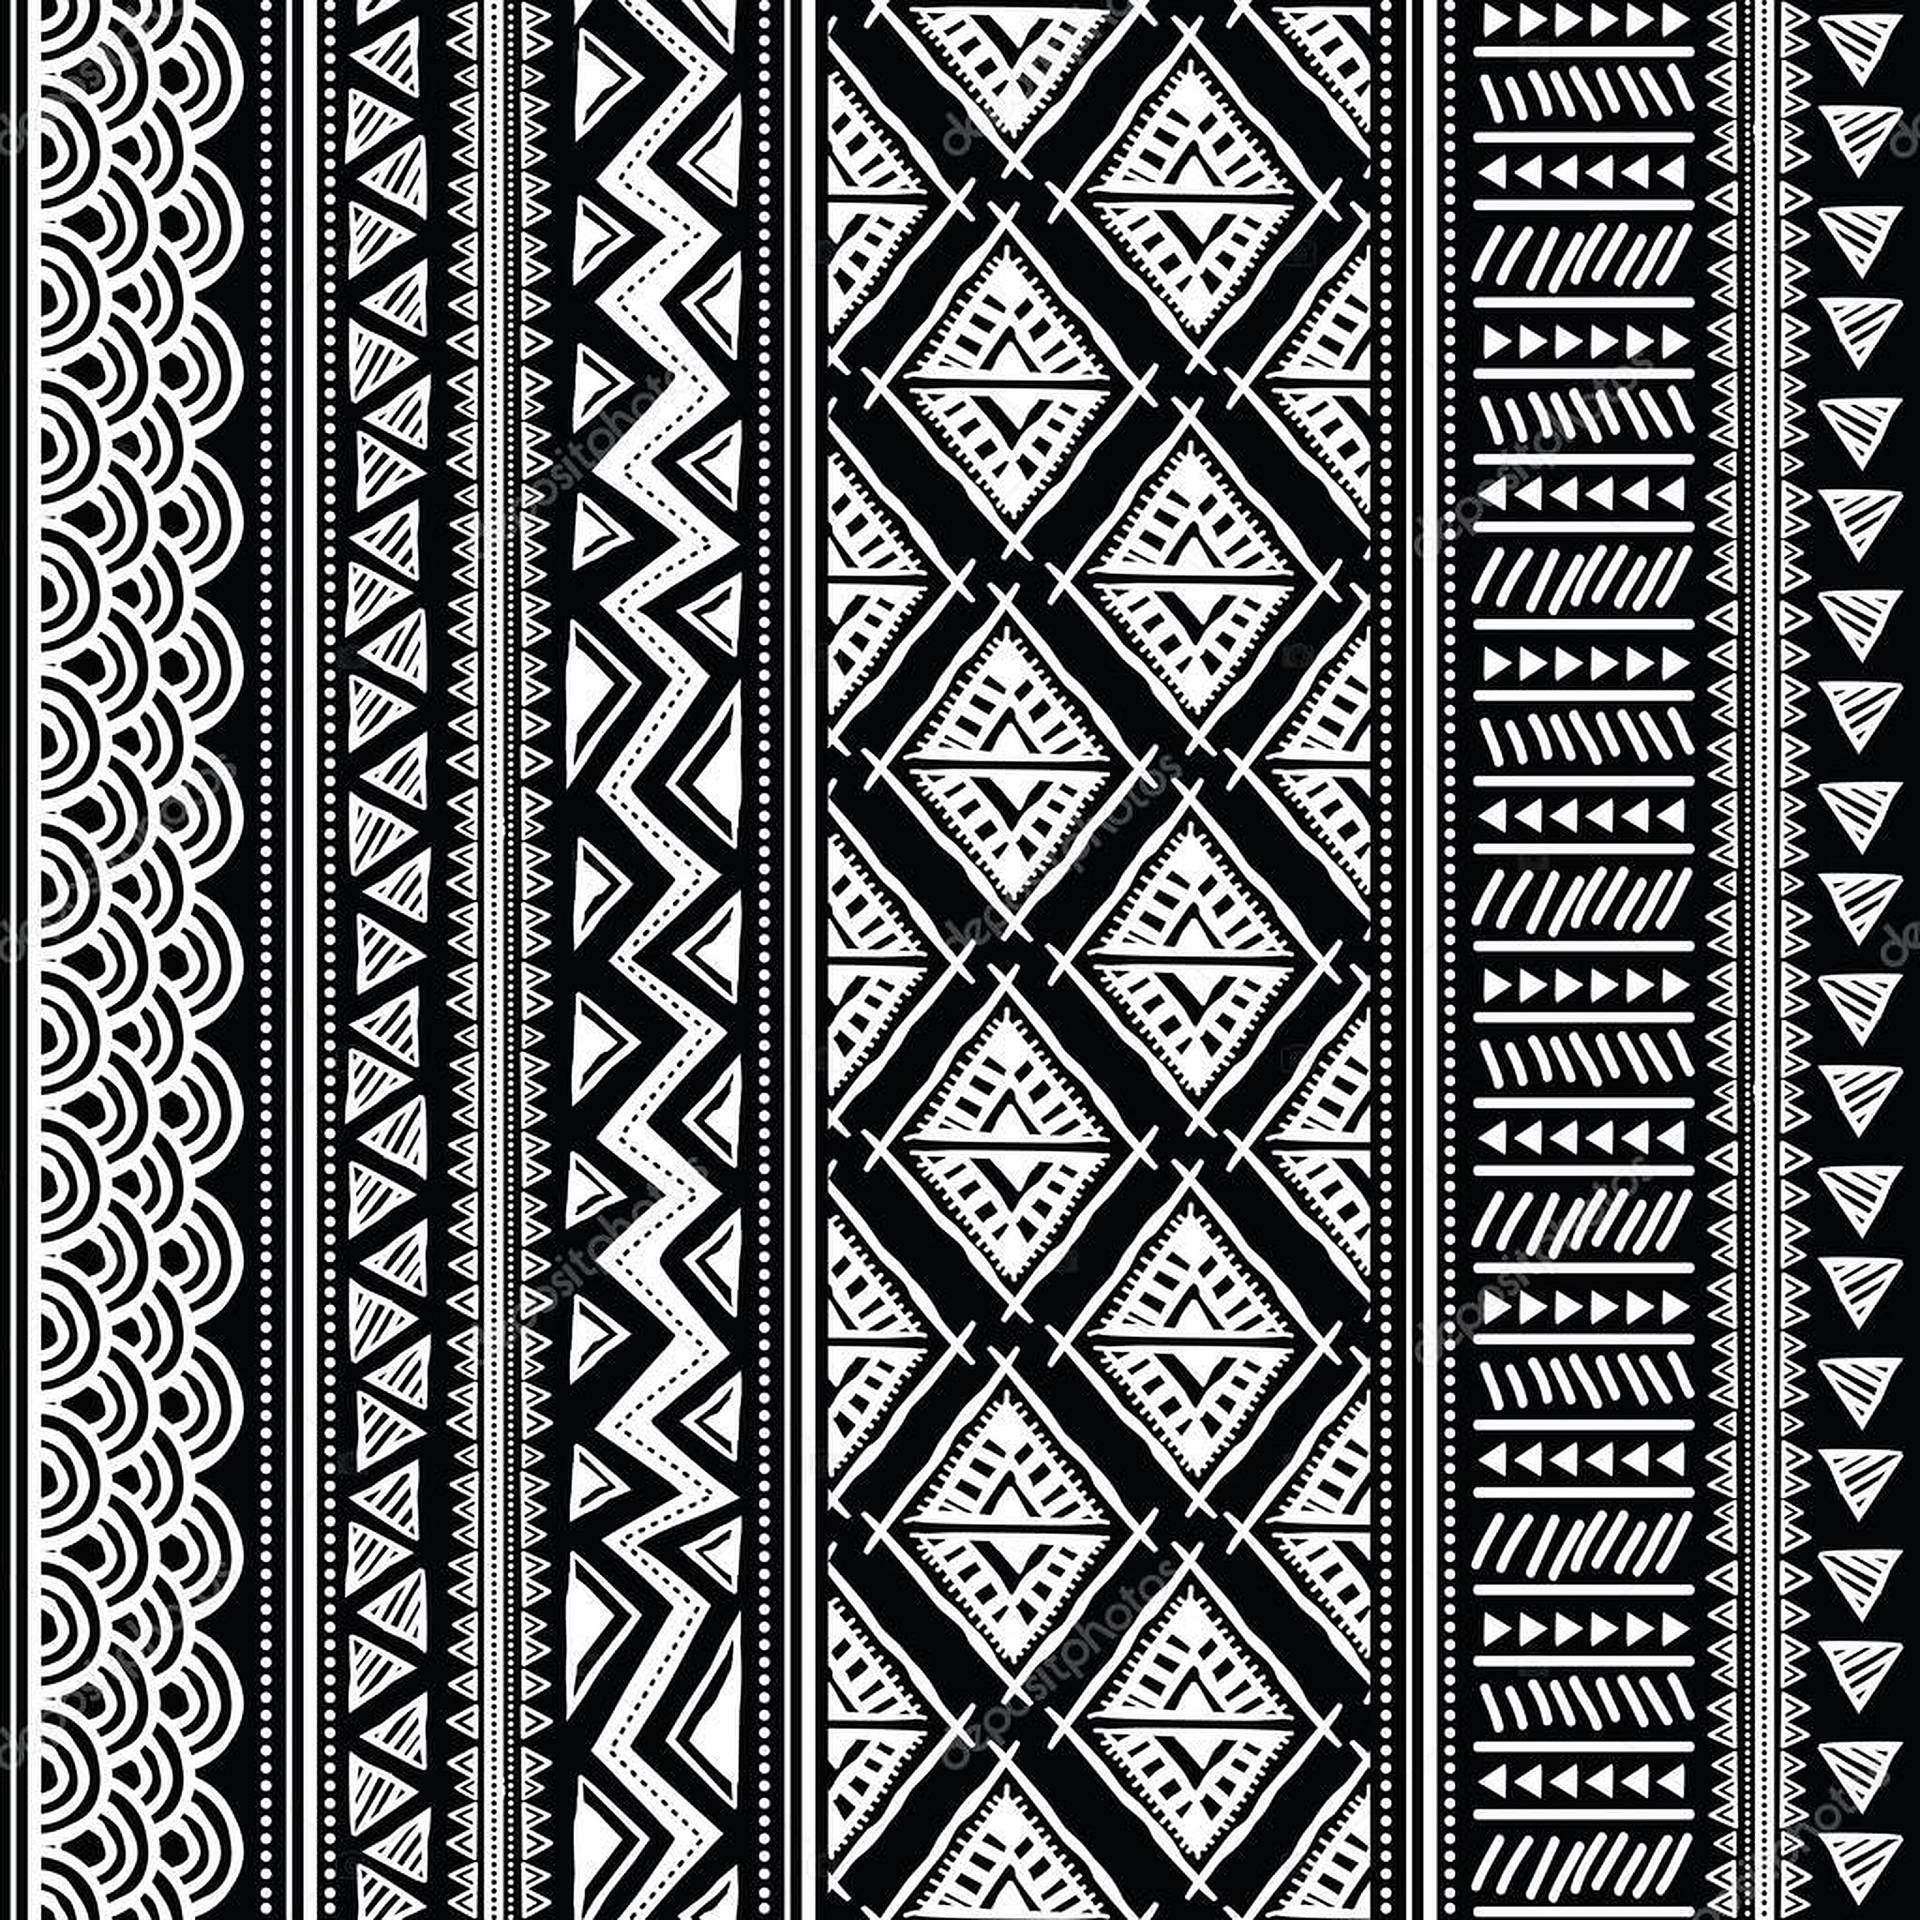 Abstract Tribal Patterns Background